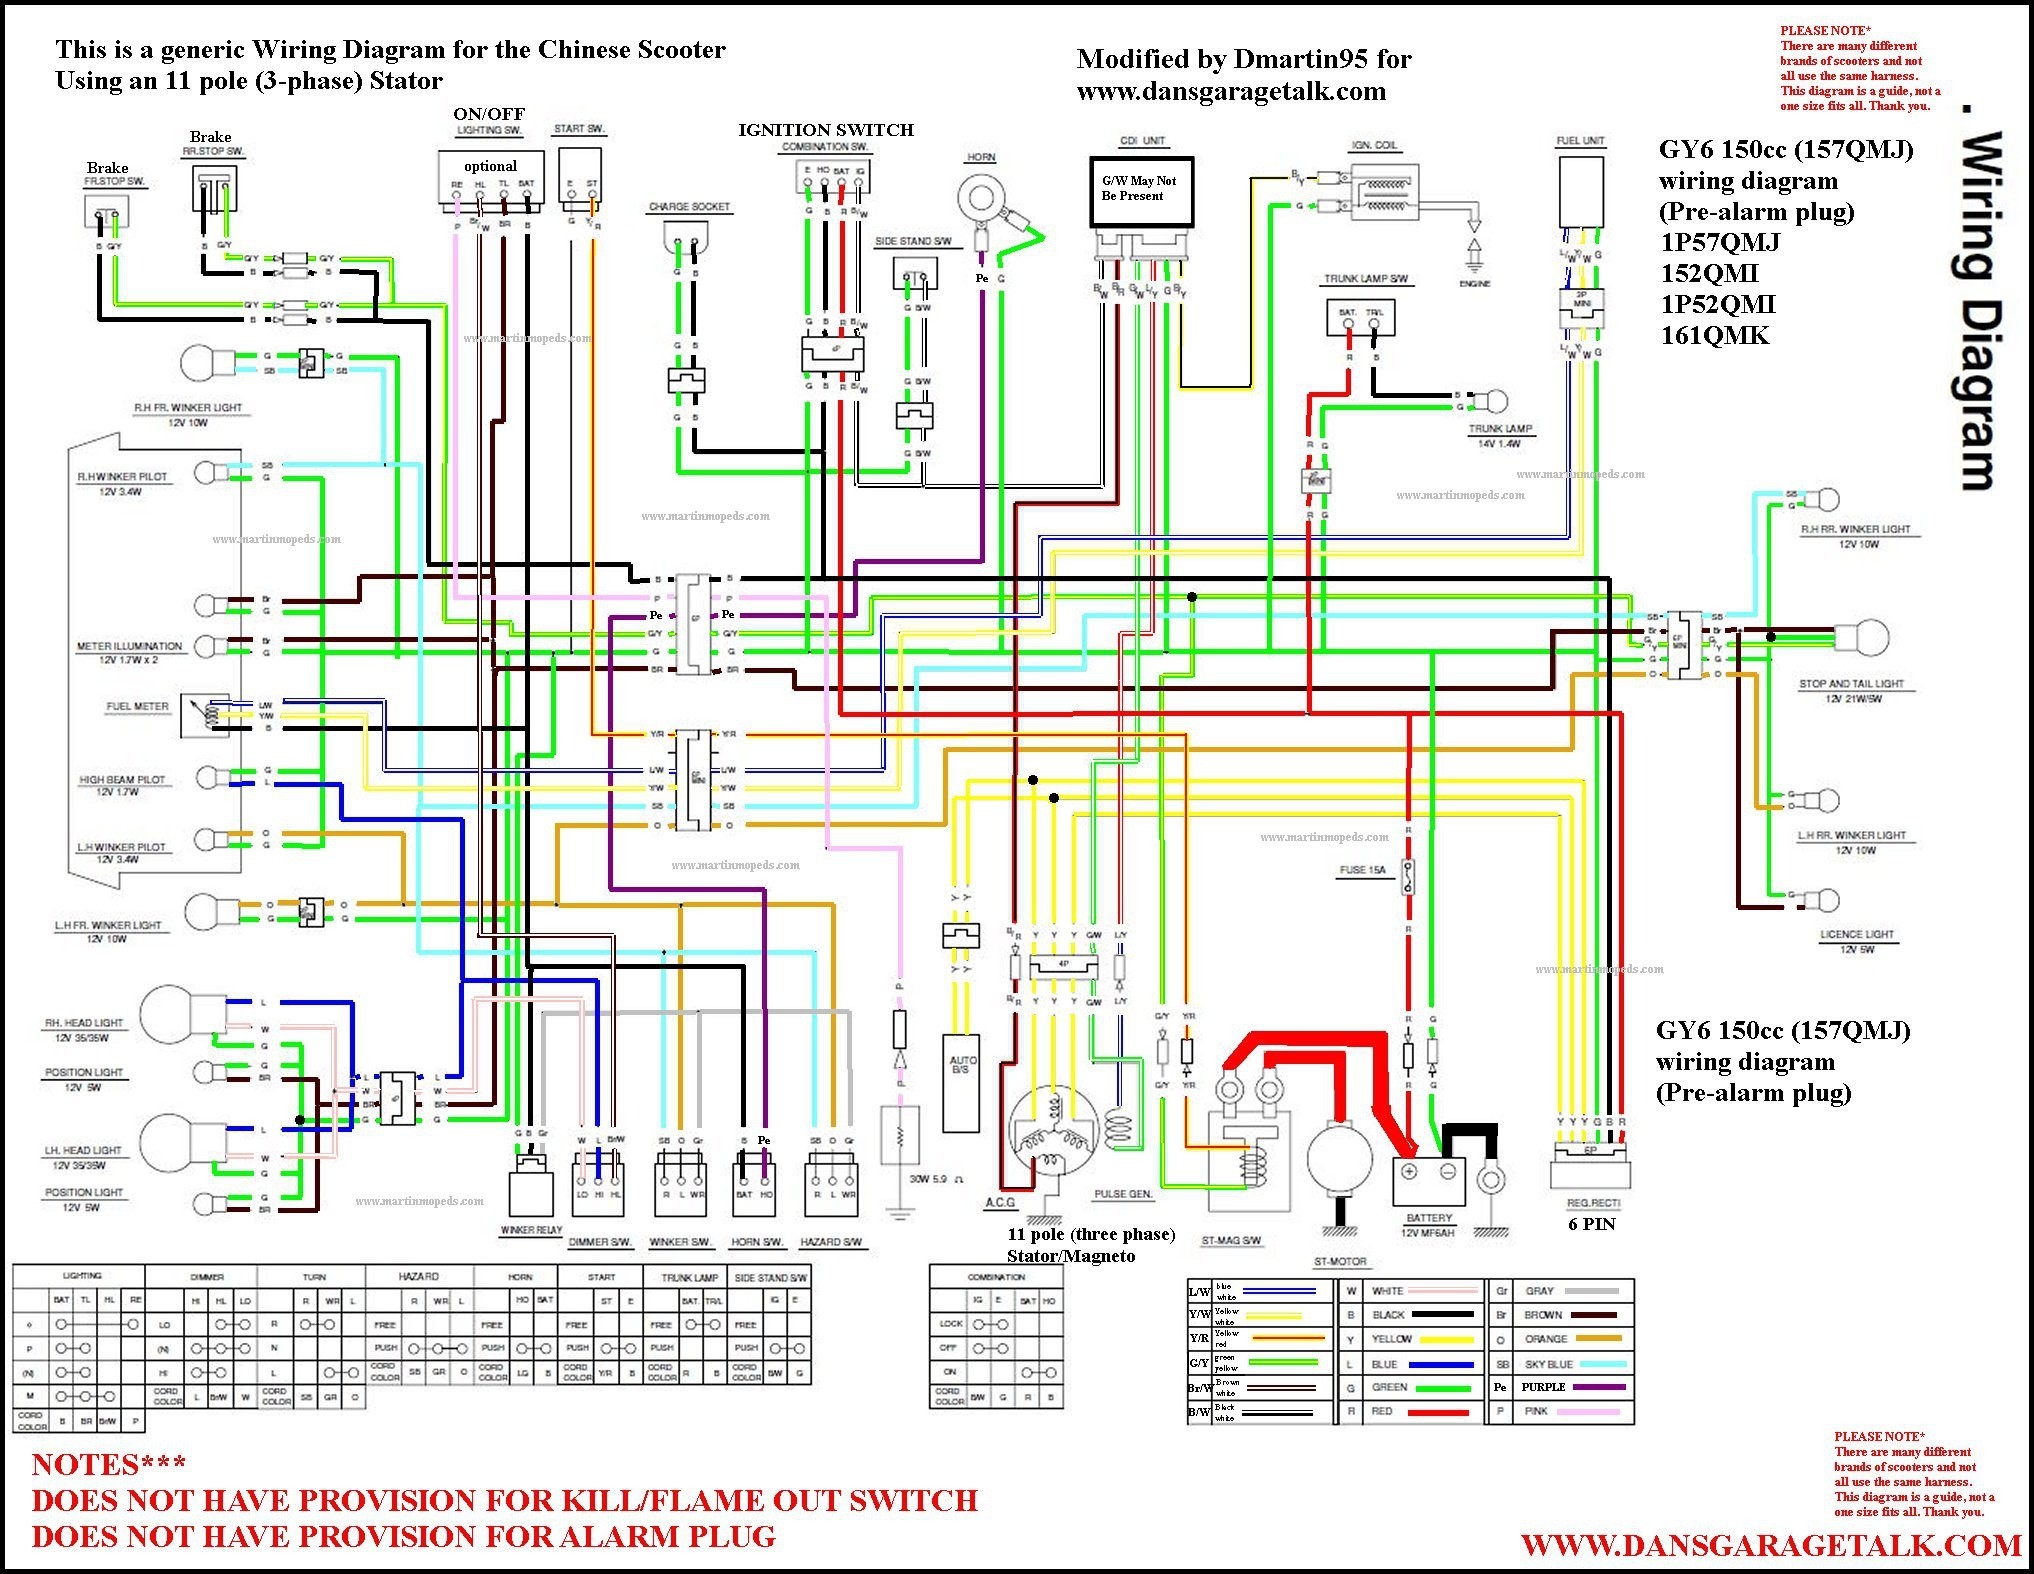 50cc Chinese Scooter Wiring Diagram Gy6 Wiring Diagram Inspirational Luxury Electrical Outlet Wiring Diagram Diagram